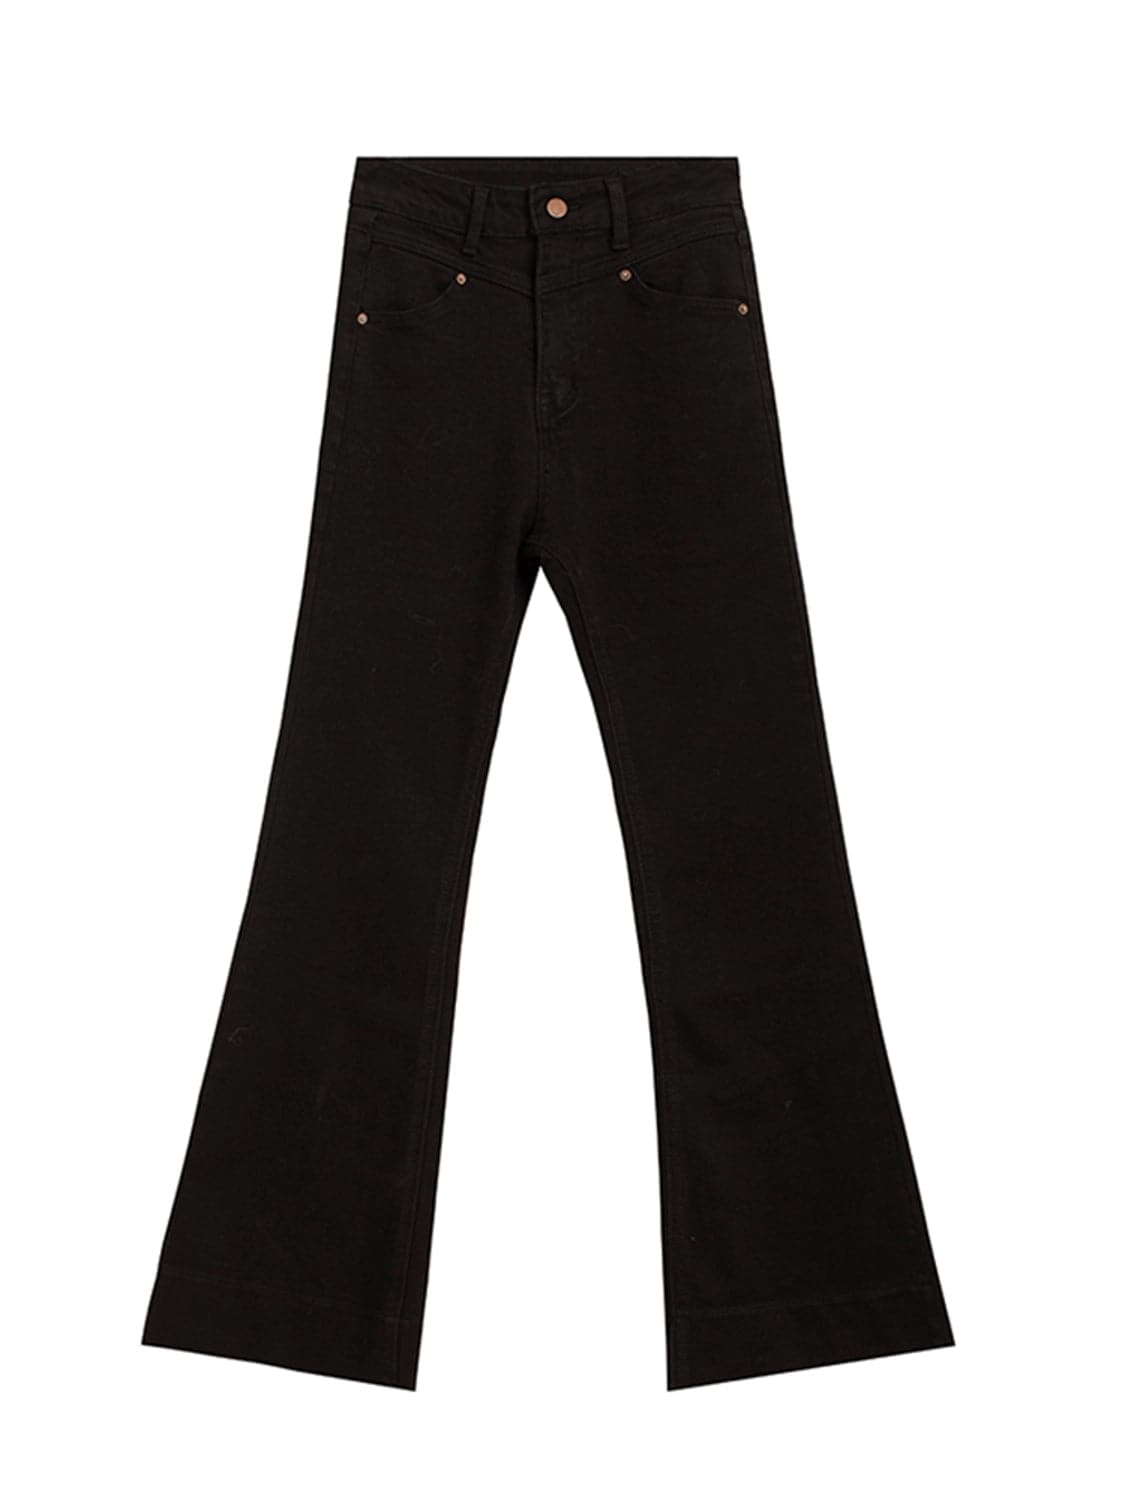 Chic Flared Black Jeans for Women with Rivet Accents